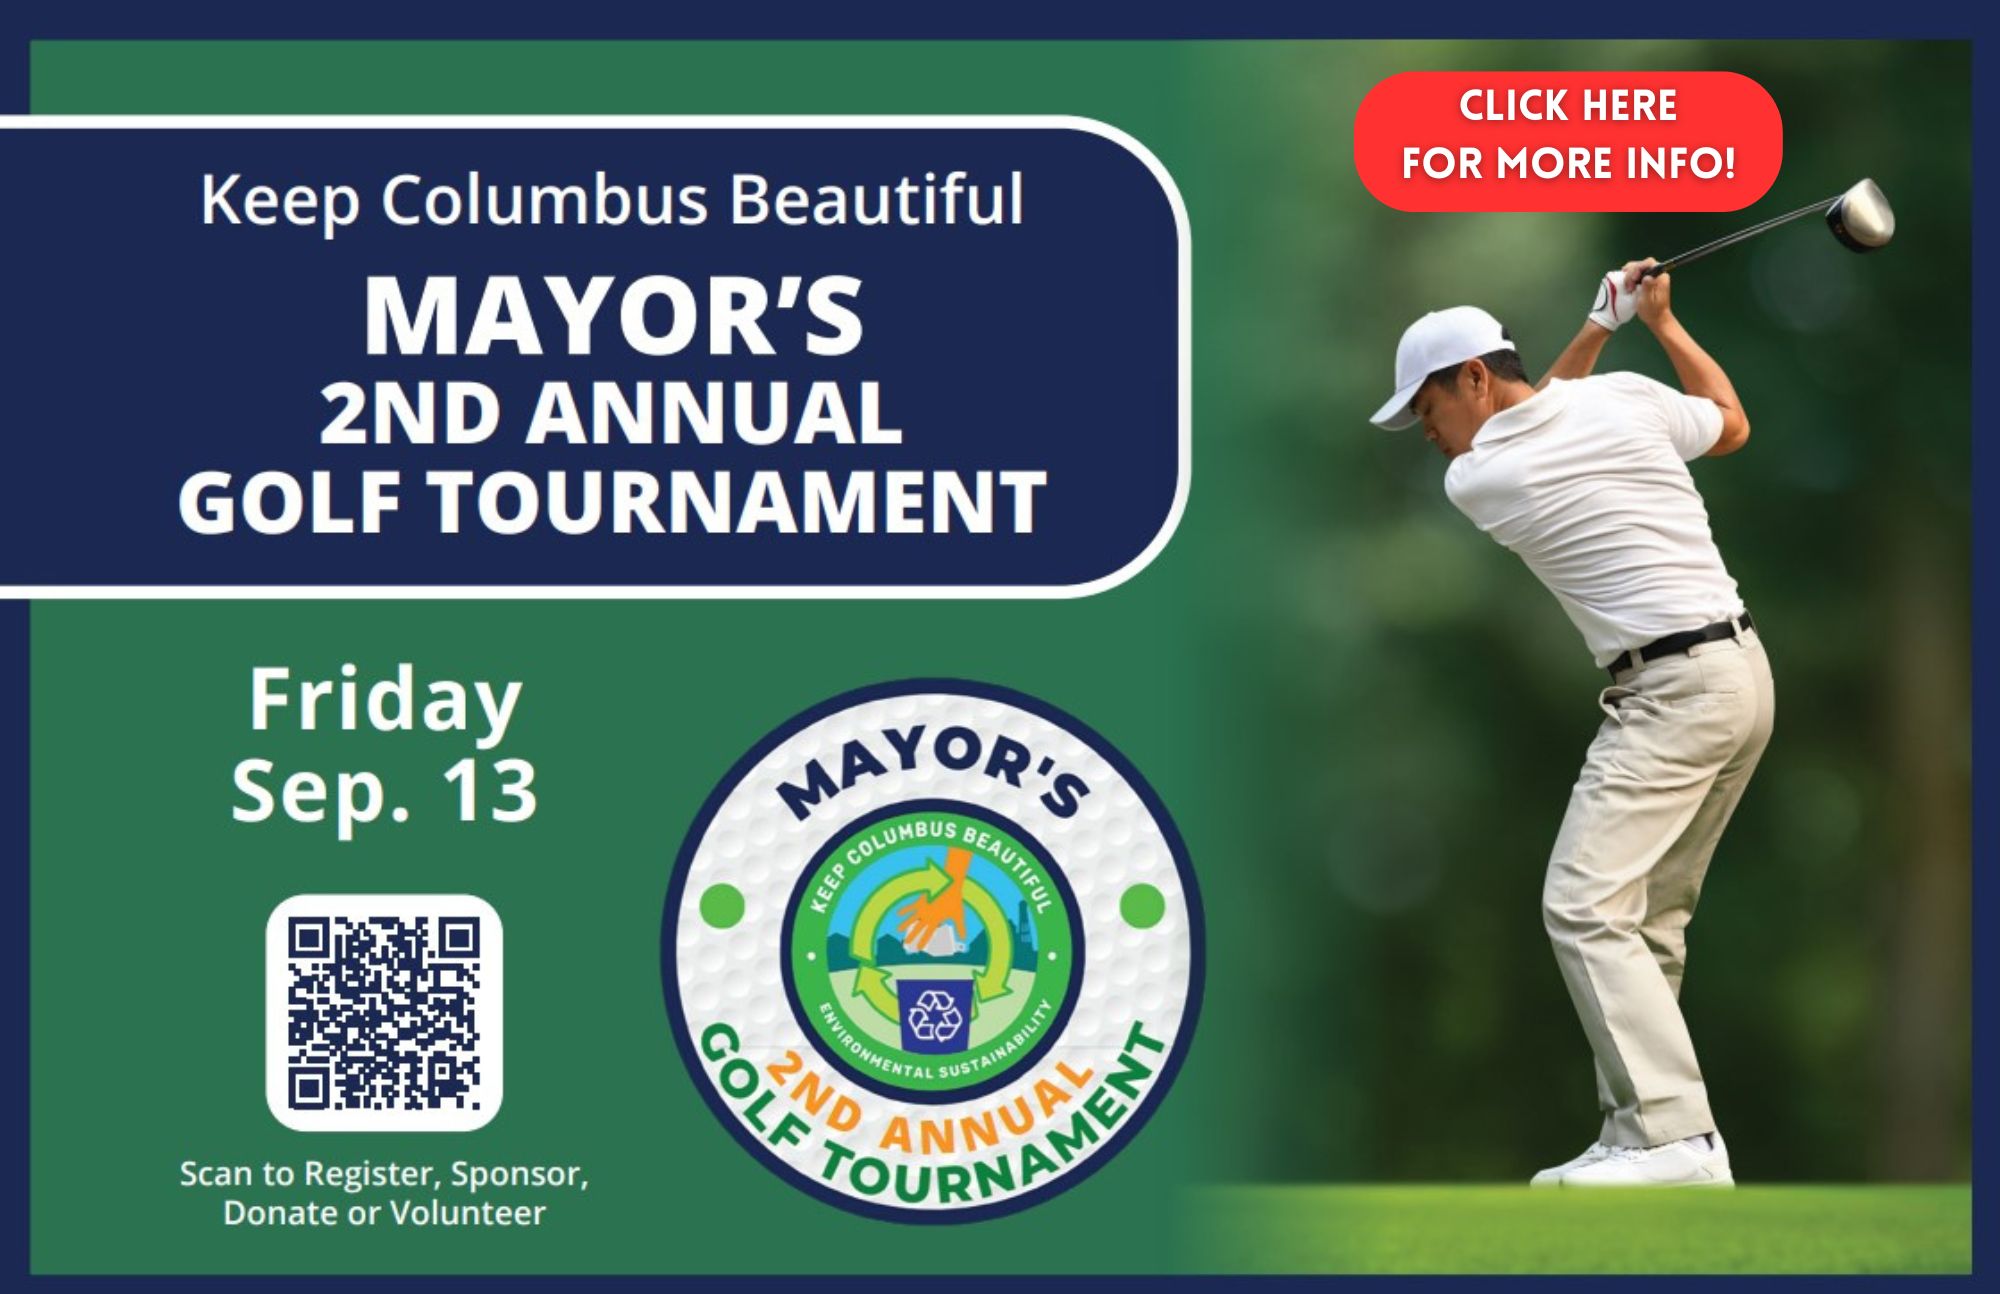 Mayor's second annual golf tournament on Friday, September 13th.